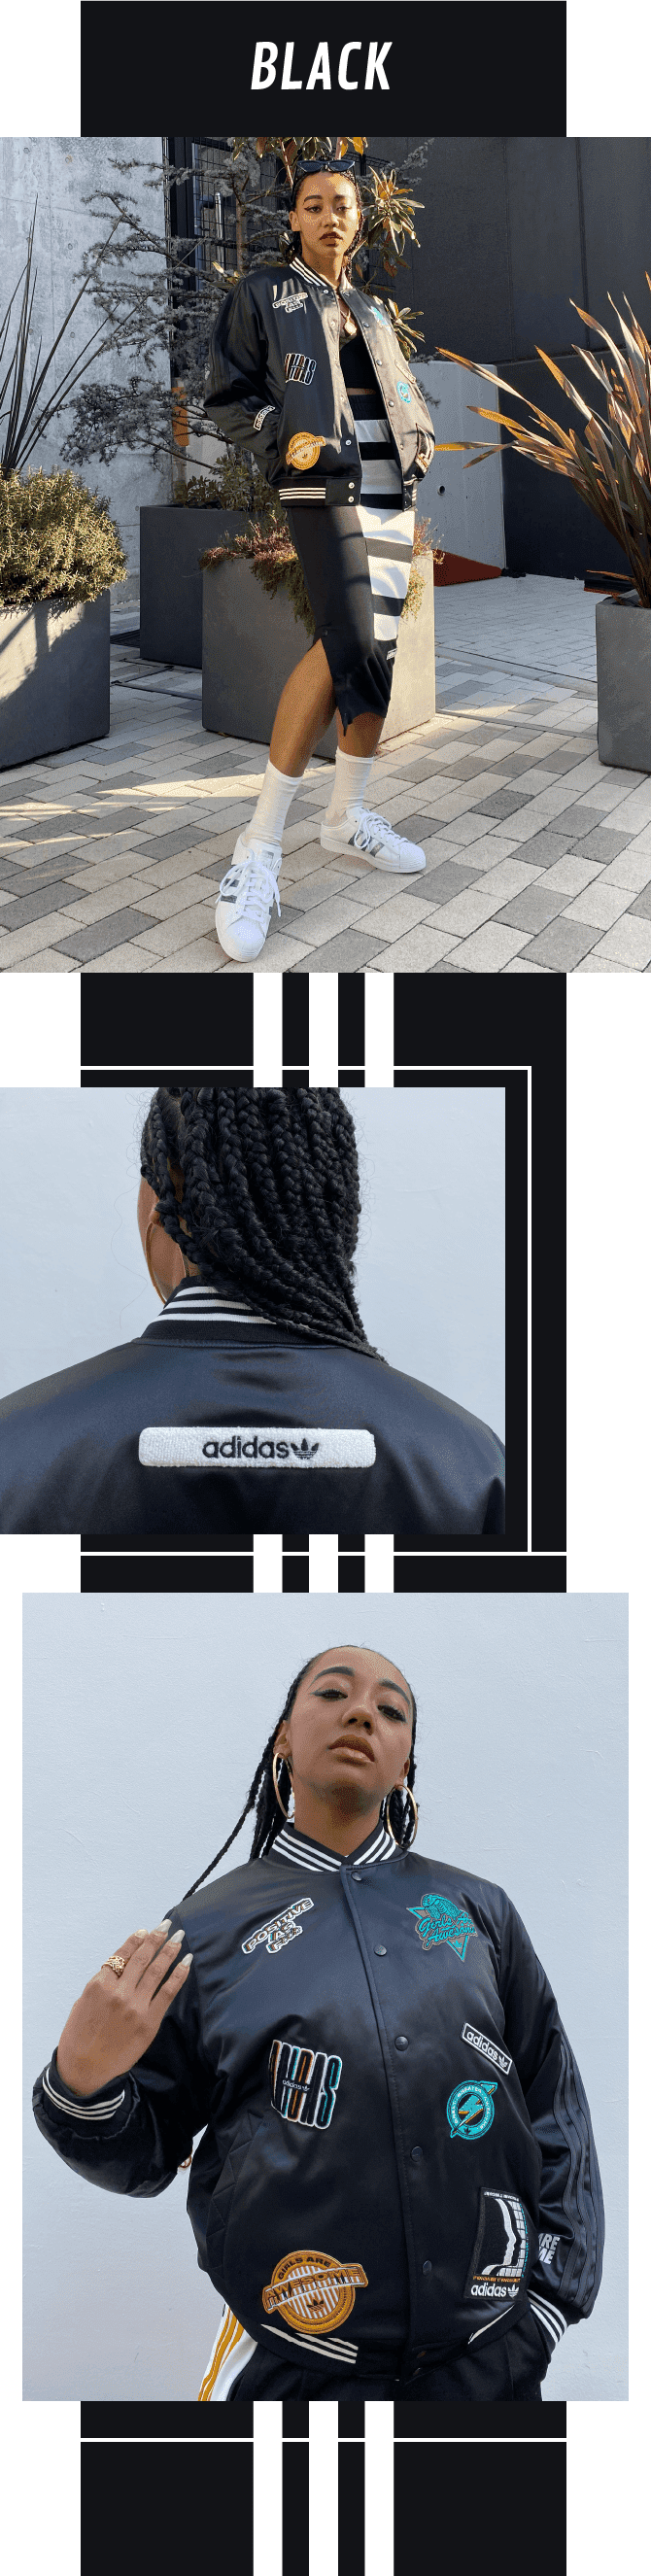 ADIDAS GIRLS ARE AWESOME